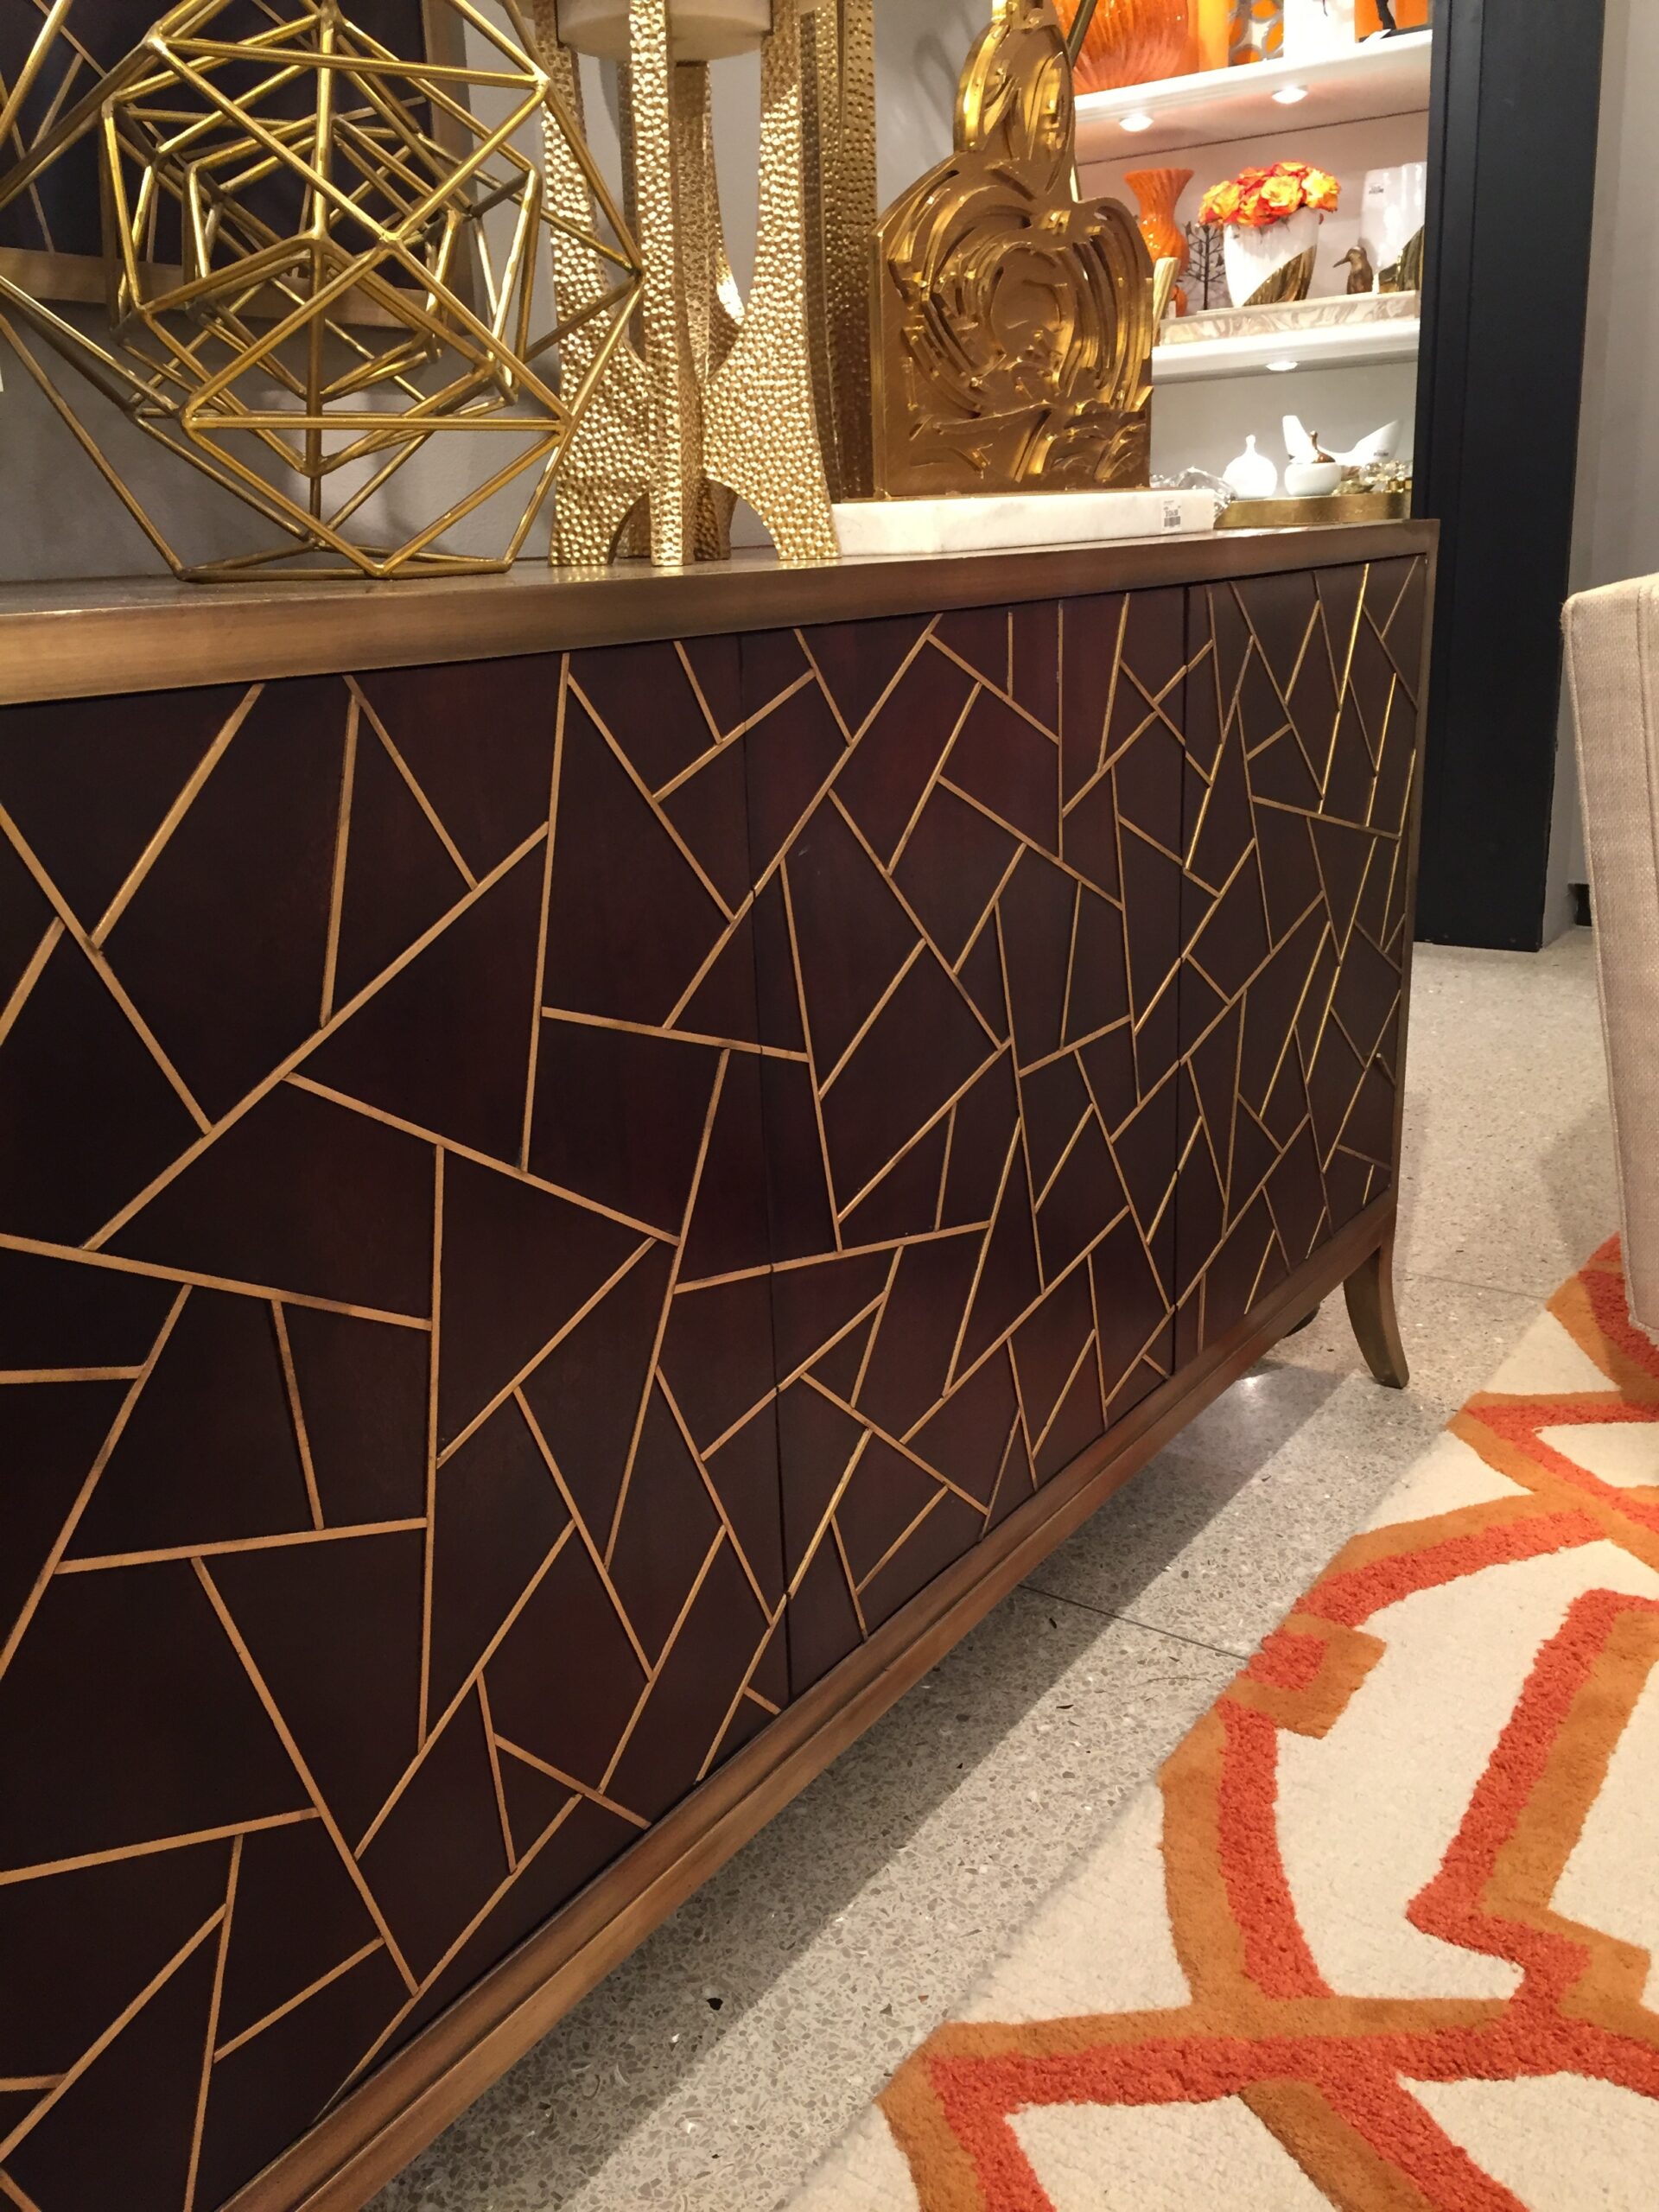 This tangier media cabinet from Global Views is a show stopper! The magnificent metal inlay on the doors is gorgeous. Paired with the geometric rug is fantastic!